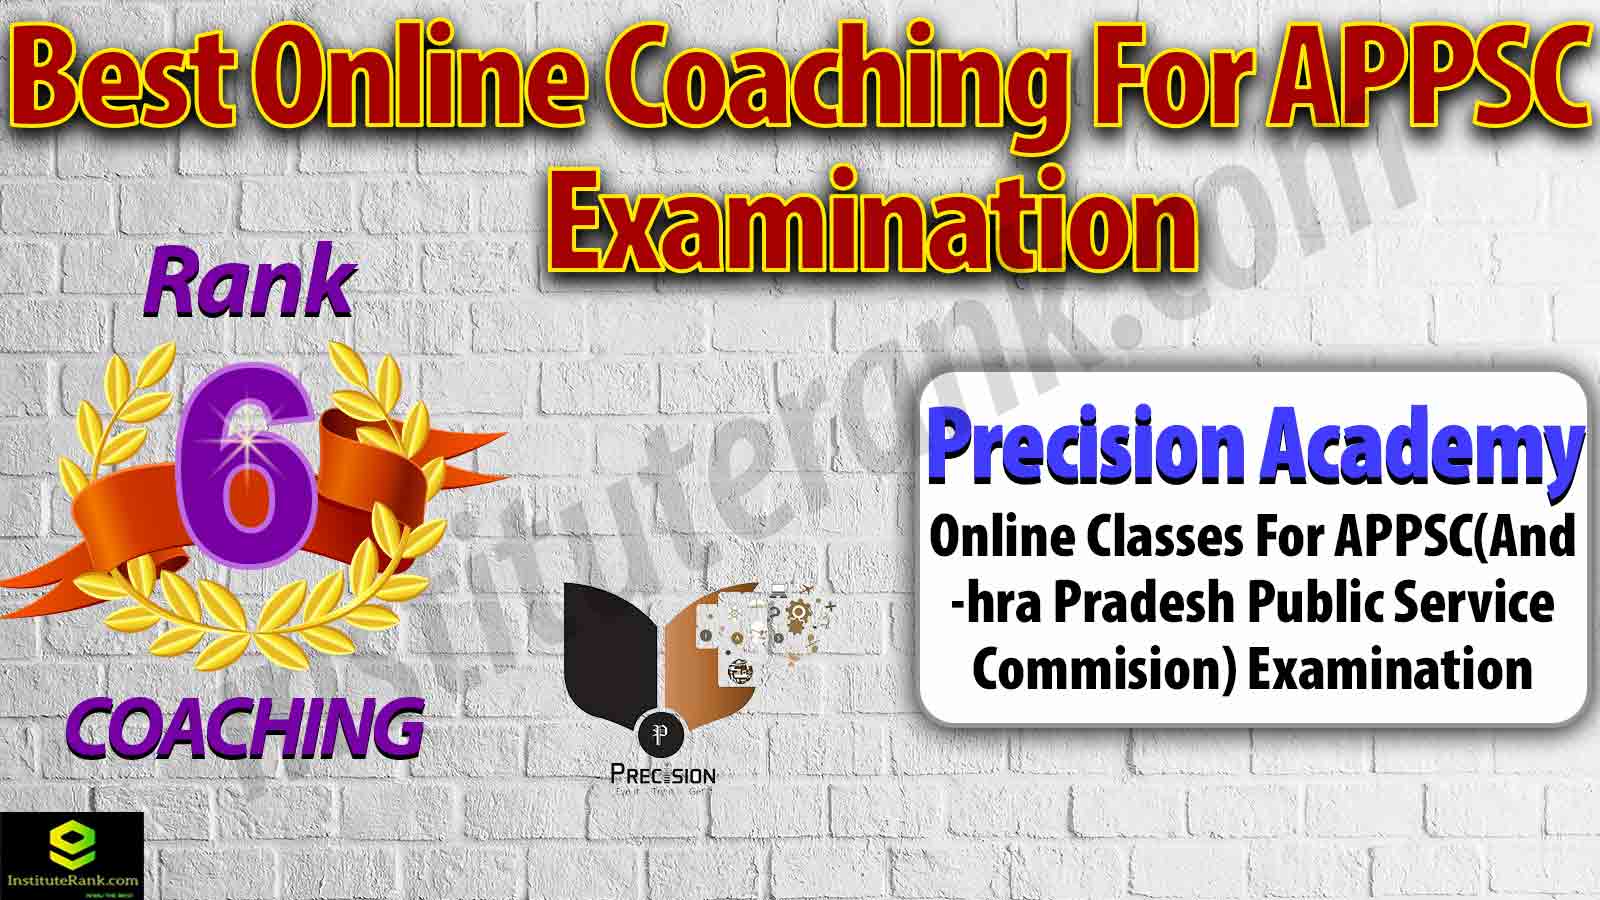 Online Coaching Preparation for APPSC Examination